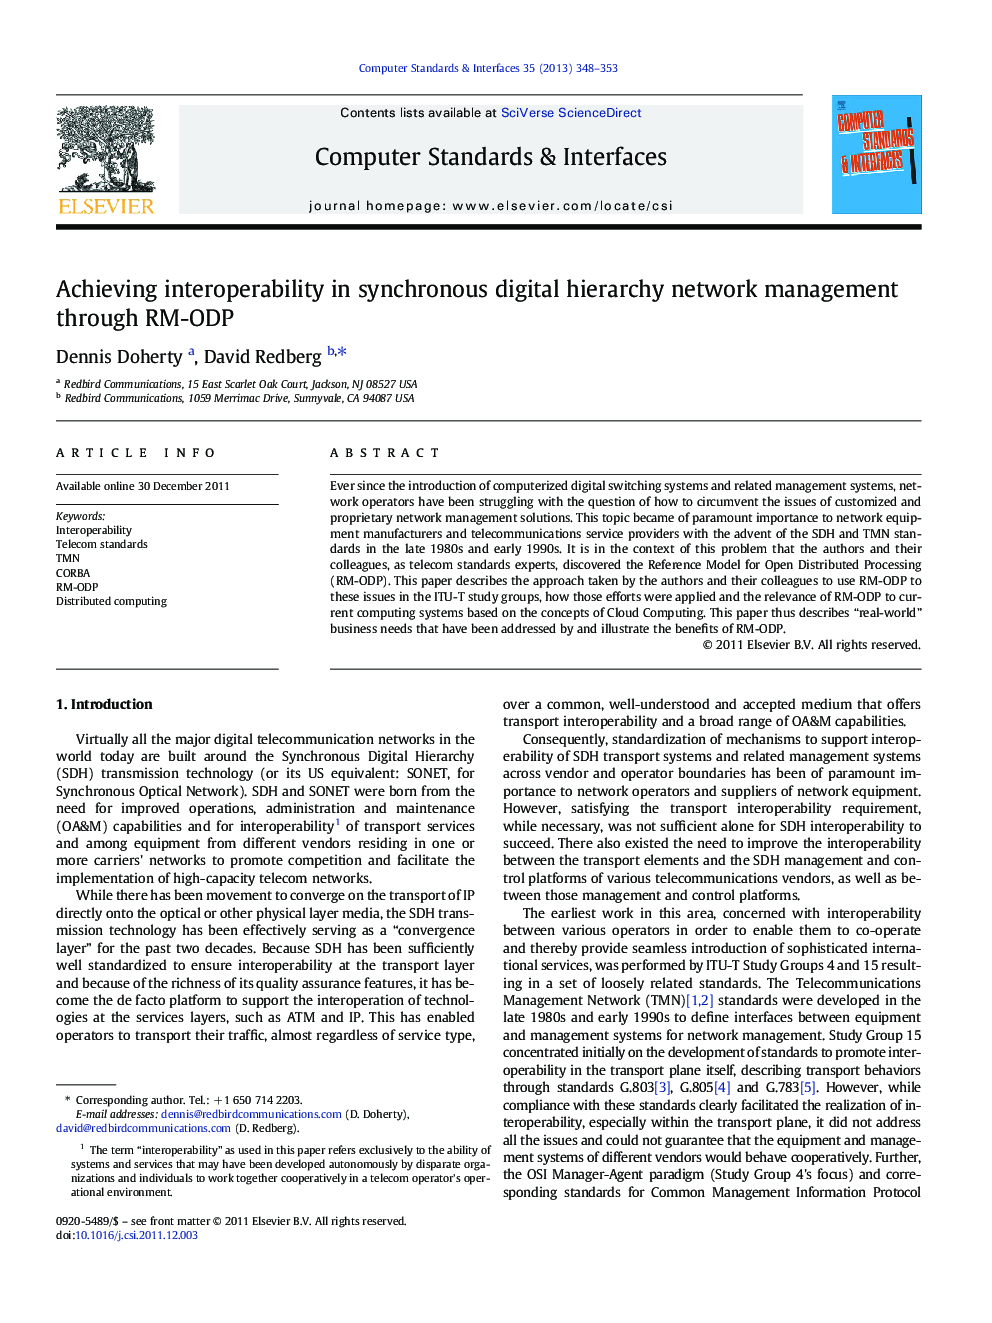 Achieving interoperability in synchronous digital hierarchy network management through RM-ODP